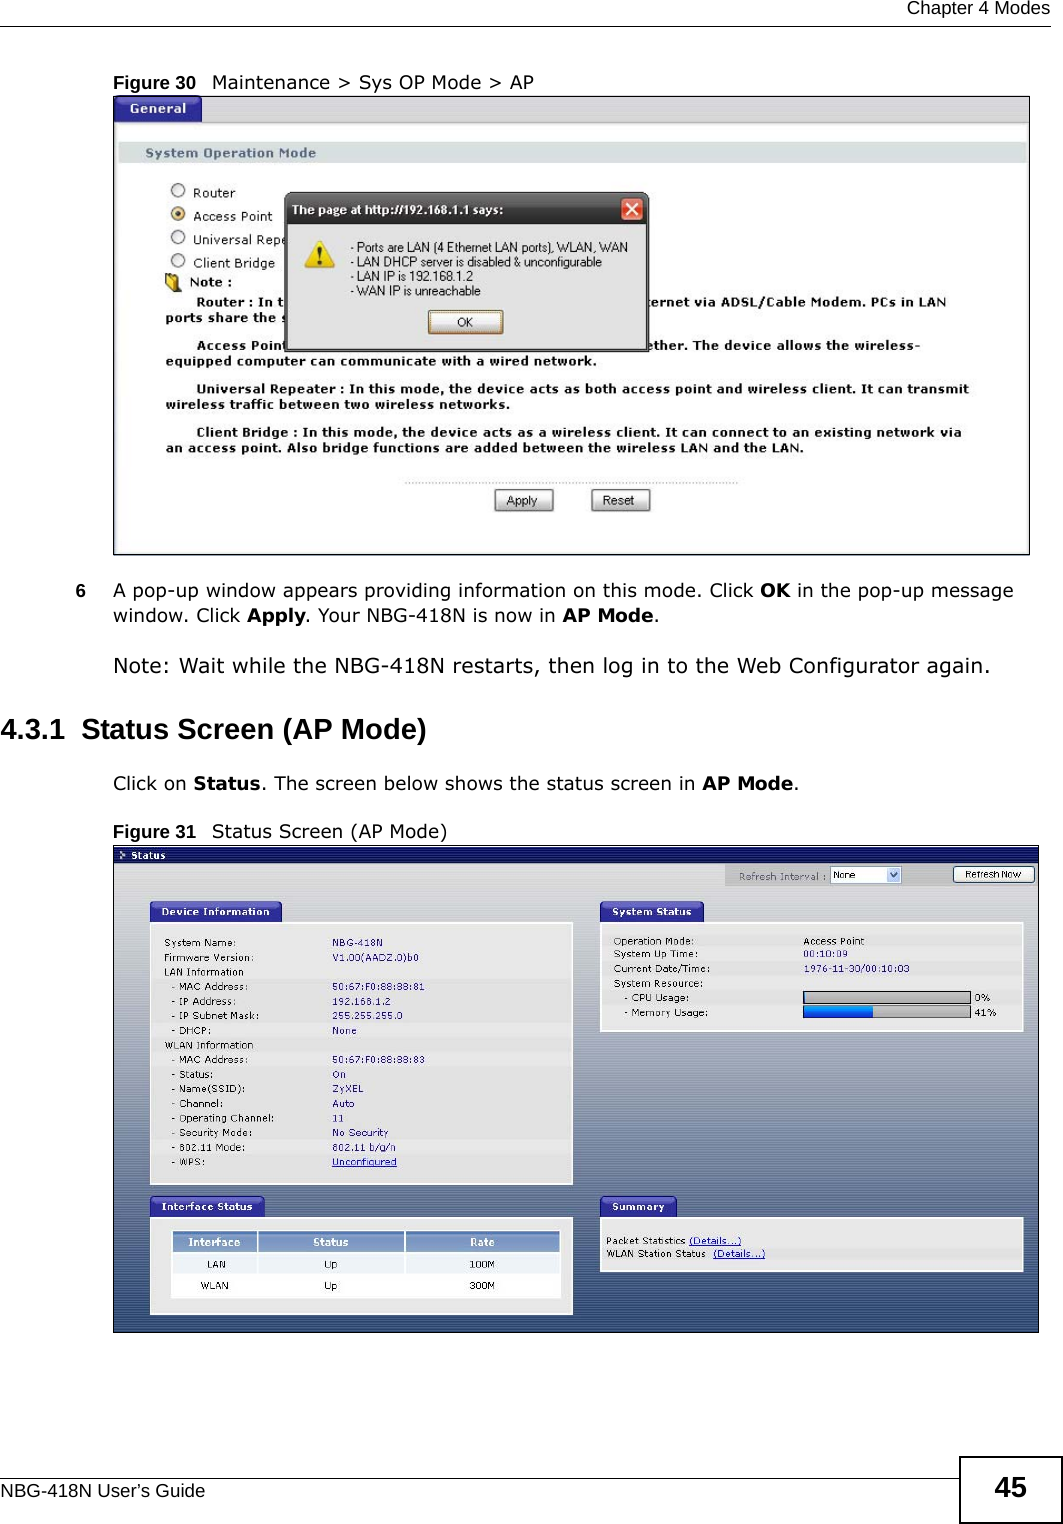  Chapter 4 ModesNBG-418N User’s Guide 45Figure 30   Maintenance &gt; Sys OP Mode &gt; AP6A pop-up window appears providing information on this mode. Click OK in the pop-up message window. Click Apply. Your NBG-418N is now in AP Mode.Note: Wait while the NBG-418N restarts, then log in to the Web Configurator again.4.3.1  Status Screen (AP Mode)Click on Status. The screen below shows the status screen in AP Mode. Figure 31   Status Screen (AP Mode) 